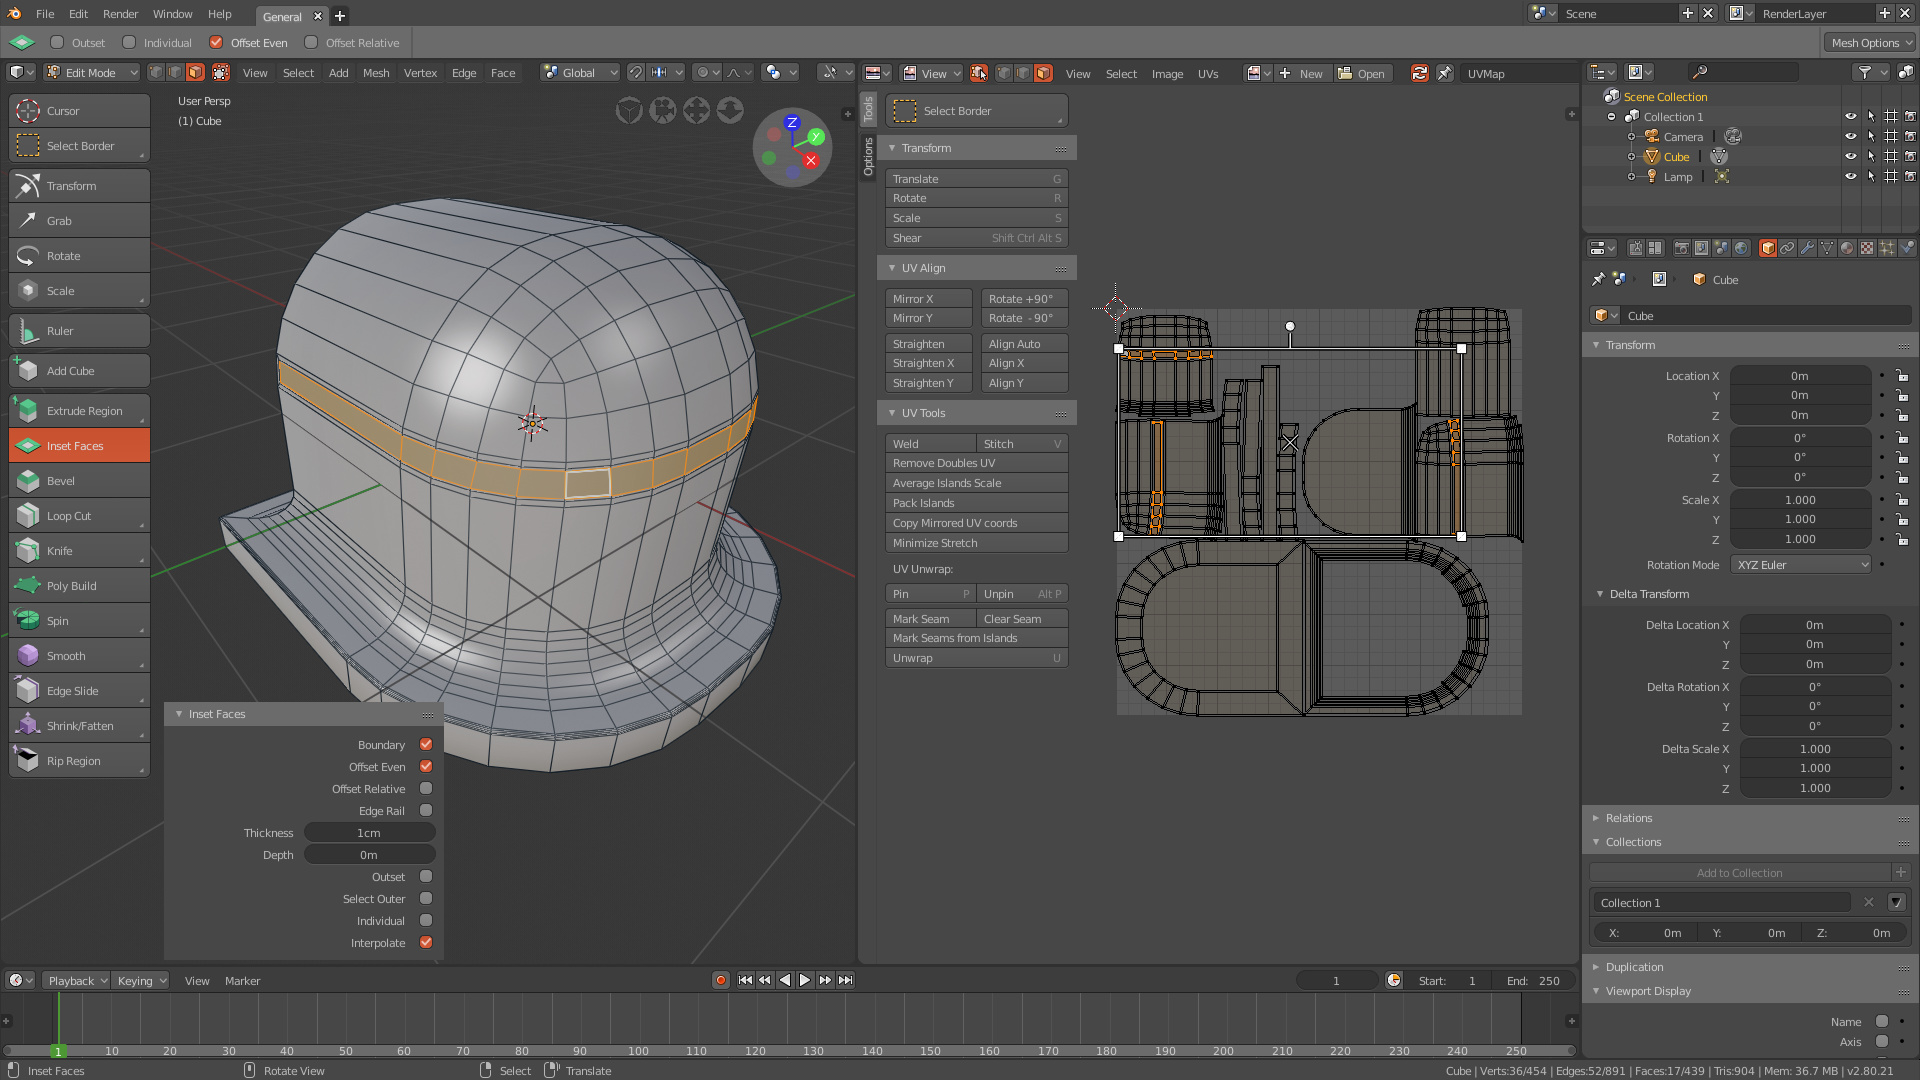 Awesome - Theme for Blender 2.8 preview image 3